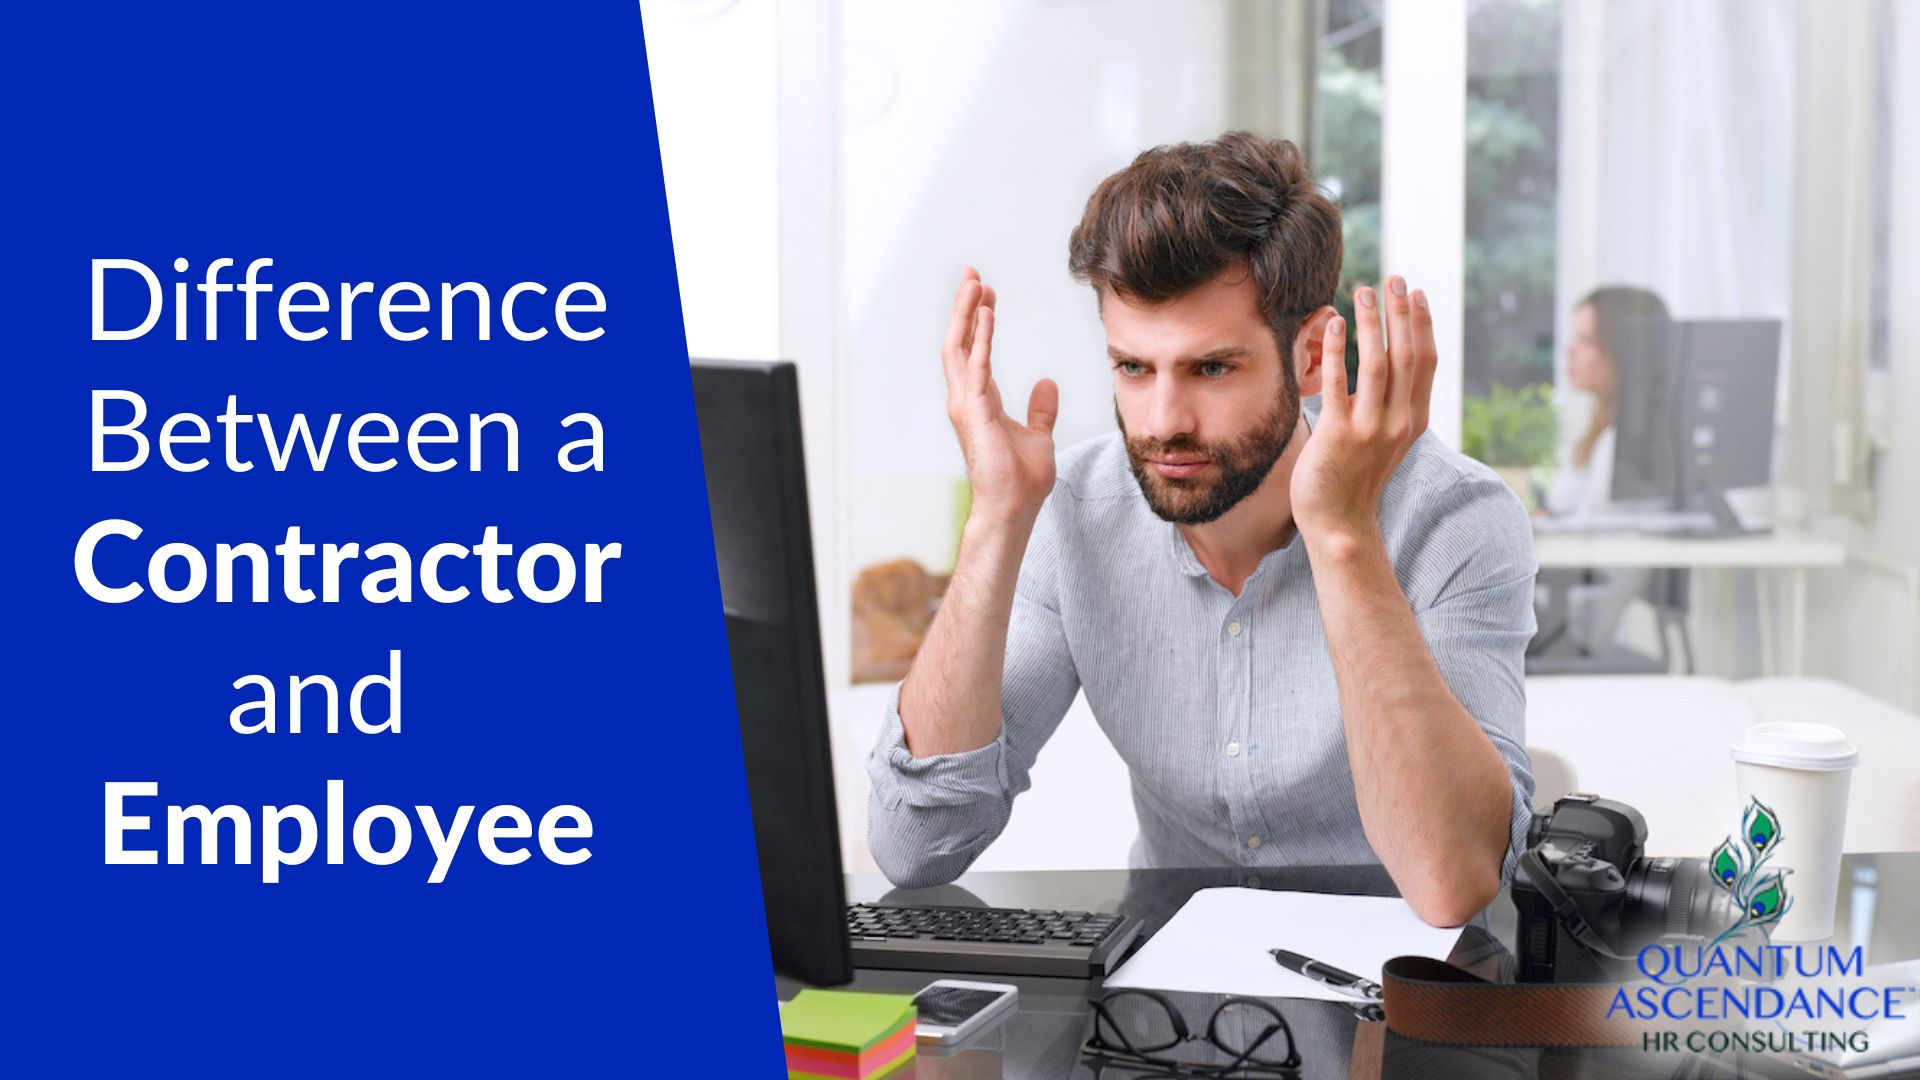 What is the Difference Between a Contractor and an Employee?